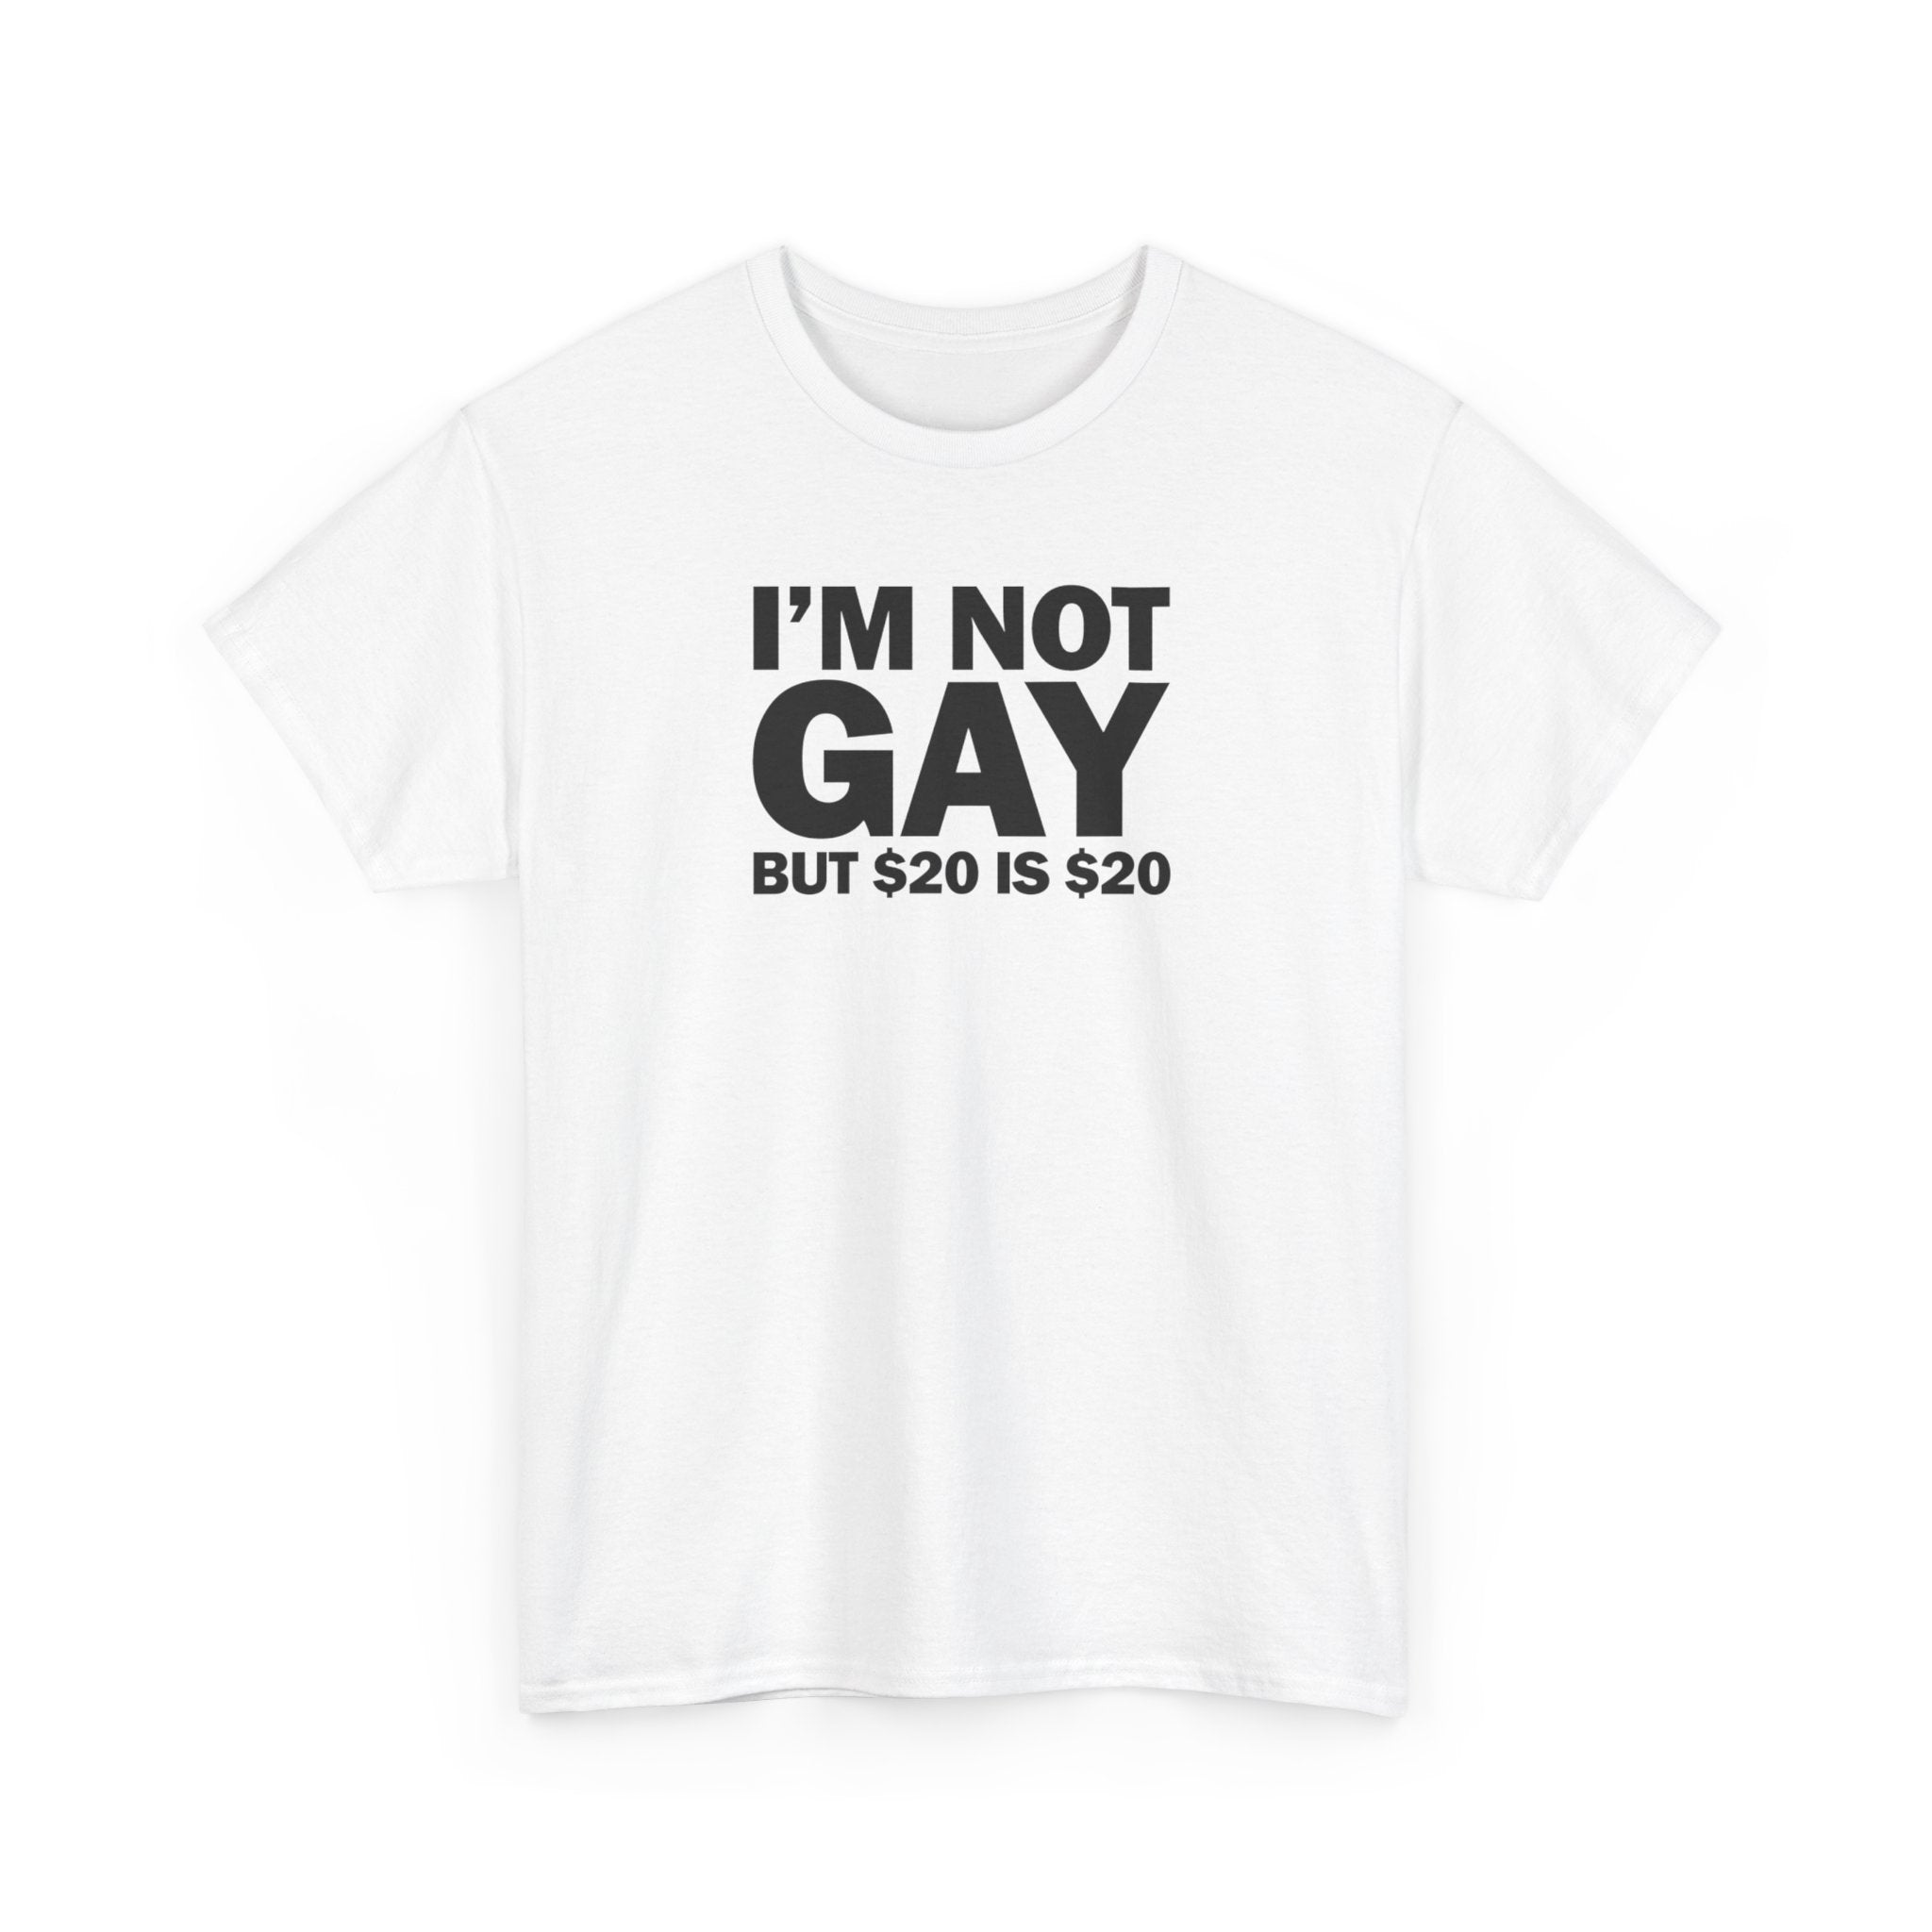 I'M NOT GAY BUT $20 IS $20 T-SHIRT